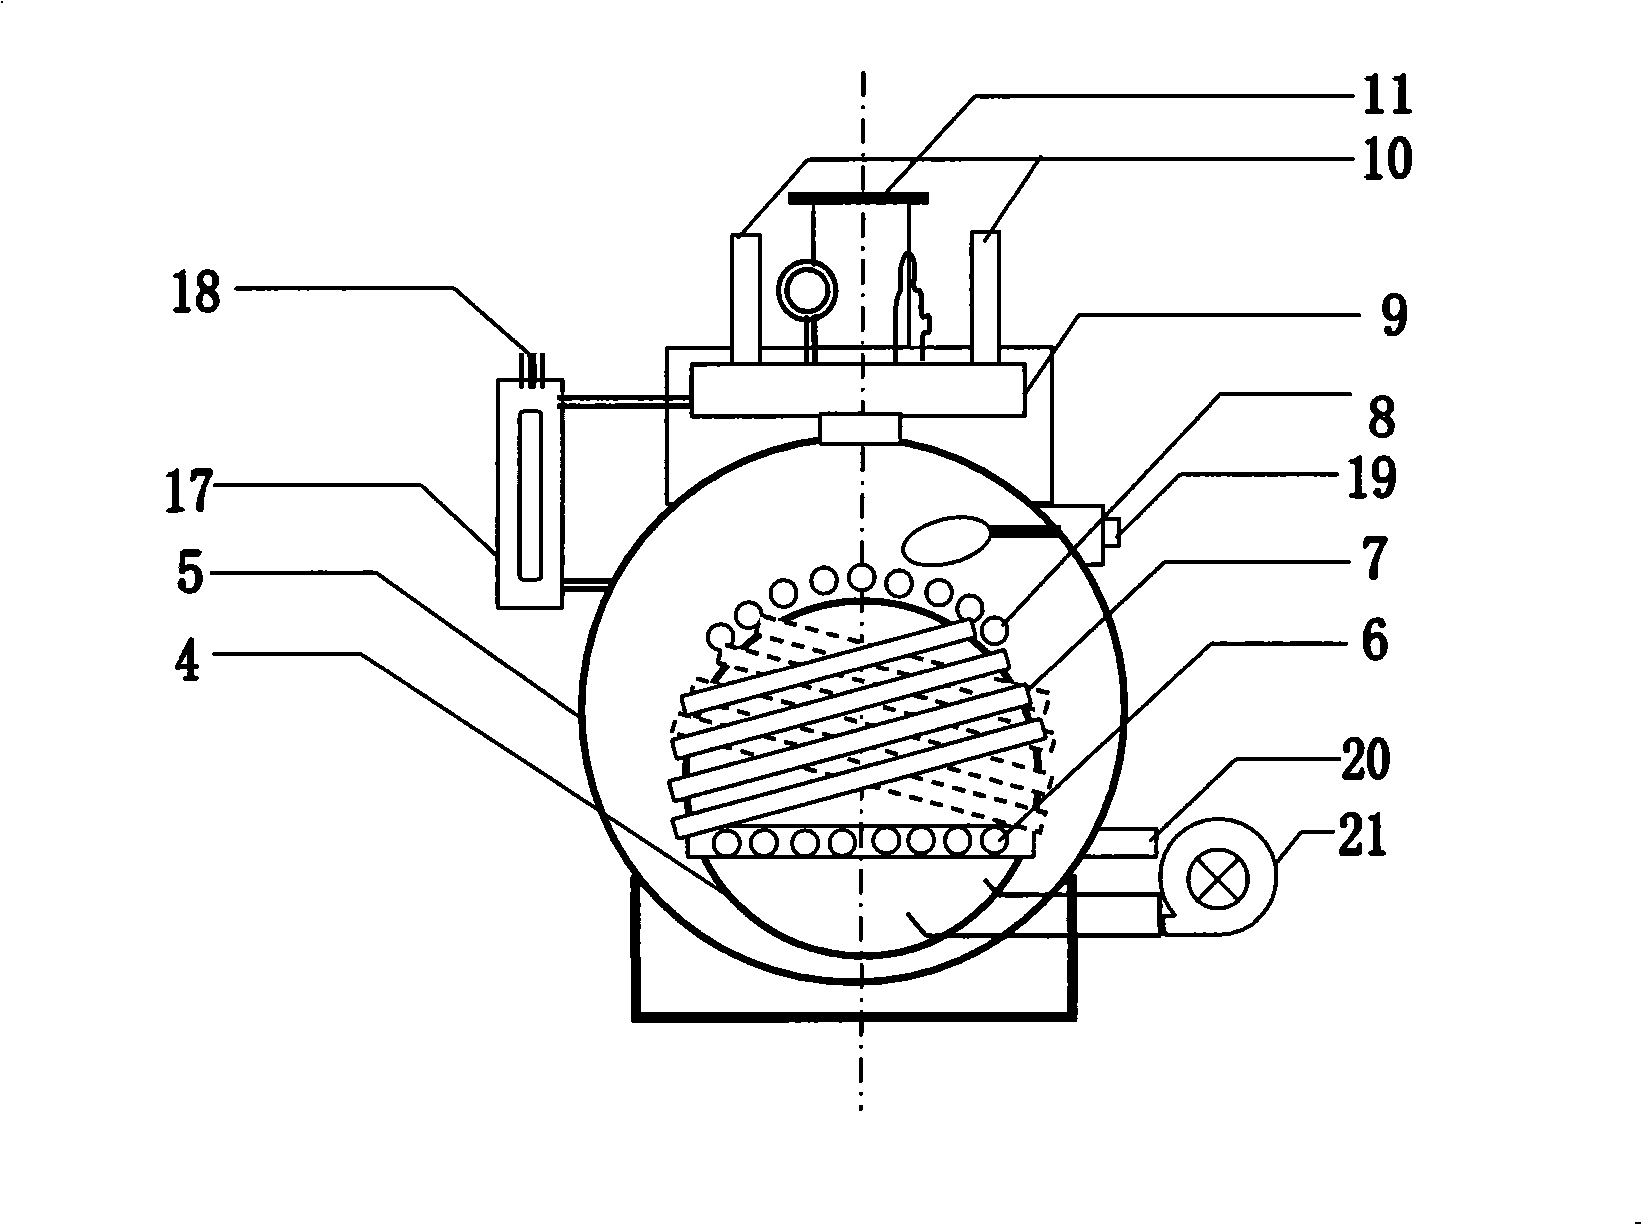 Far infrared hot pipe type vapor and water dual-purpose heating stove and method of use thereof